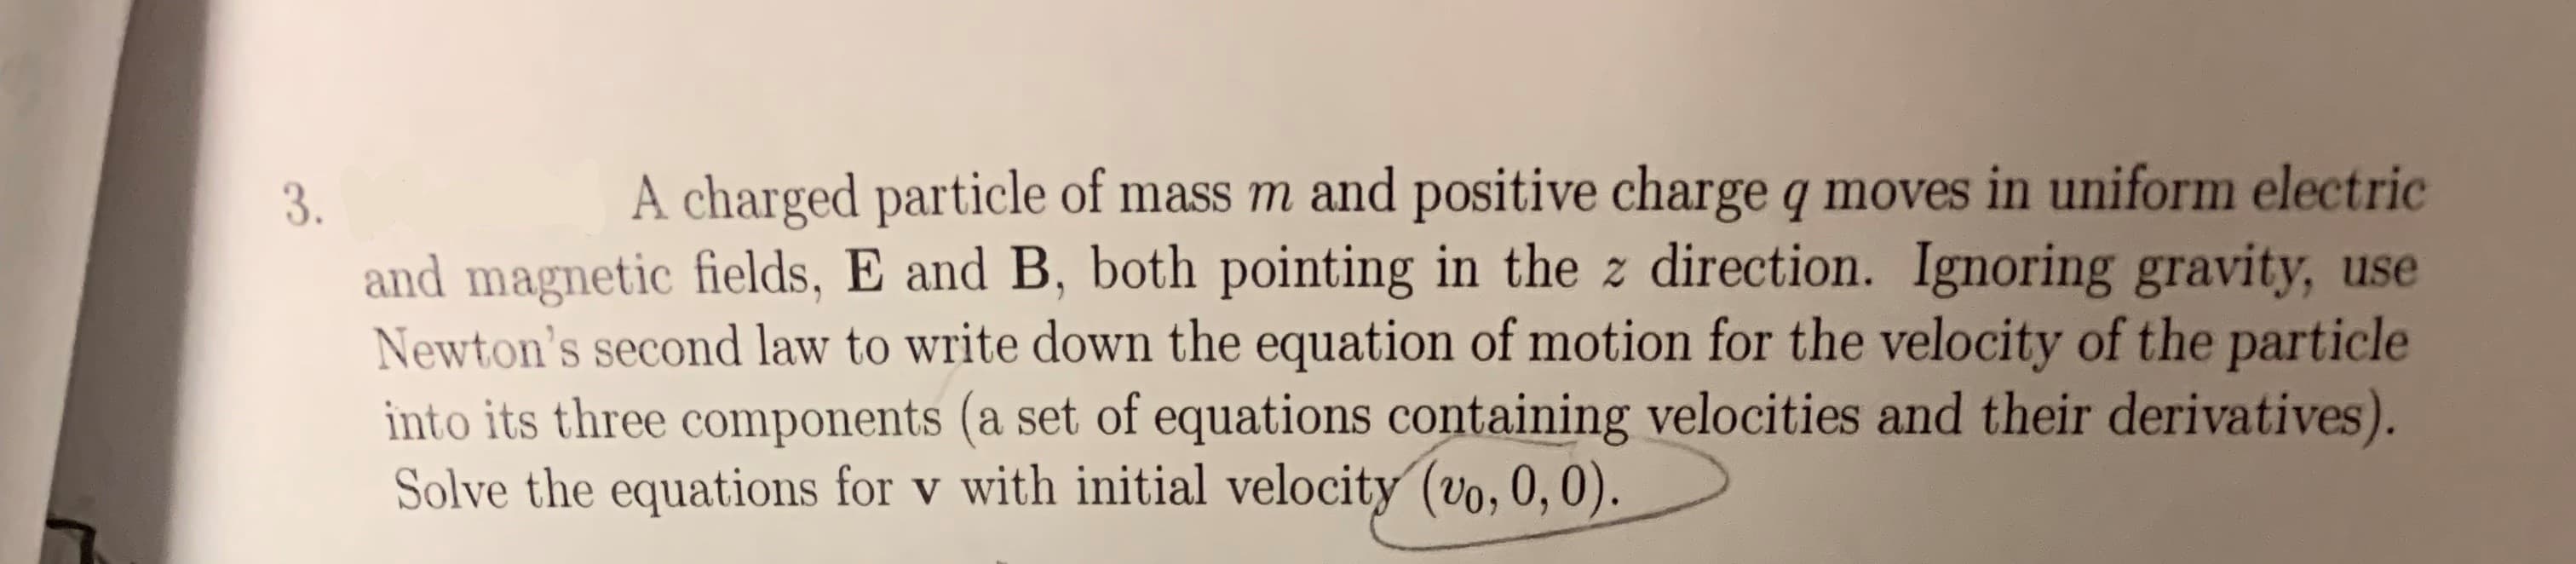 A charged particle of mass m and positive charge q moves in uniform electric
3.
and magnetic fields, E and B, both pointing in the z direction. Ignoring gravity, use
Newton's second law to write down the equation of motion for the velocity of the particle
into its three components (a set of equations containing velocities and their derivatives).
Solve the equations for v with initial velocity (vo, 0, 0).
